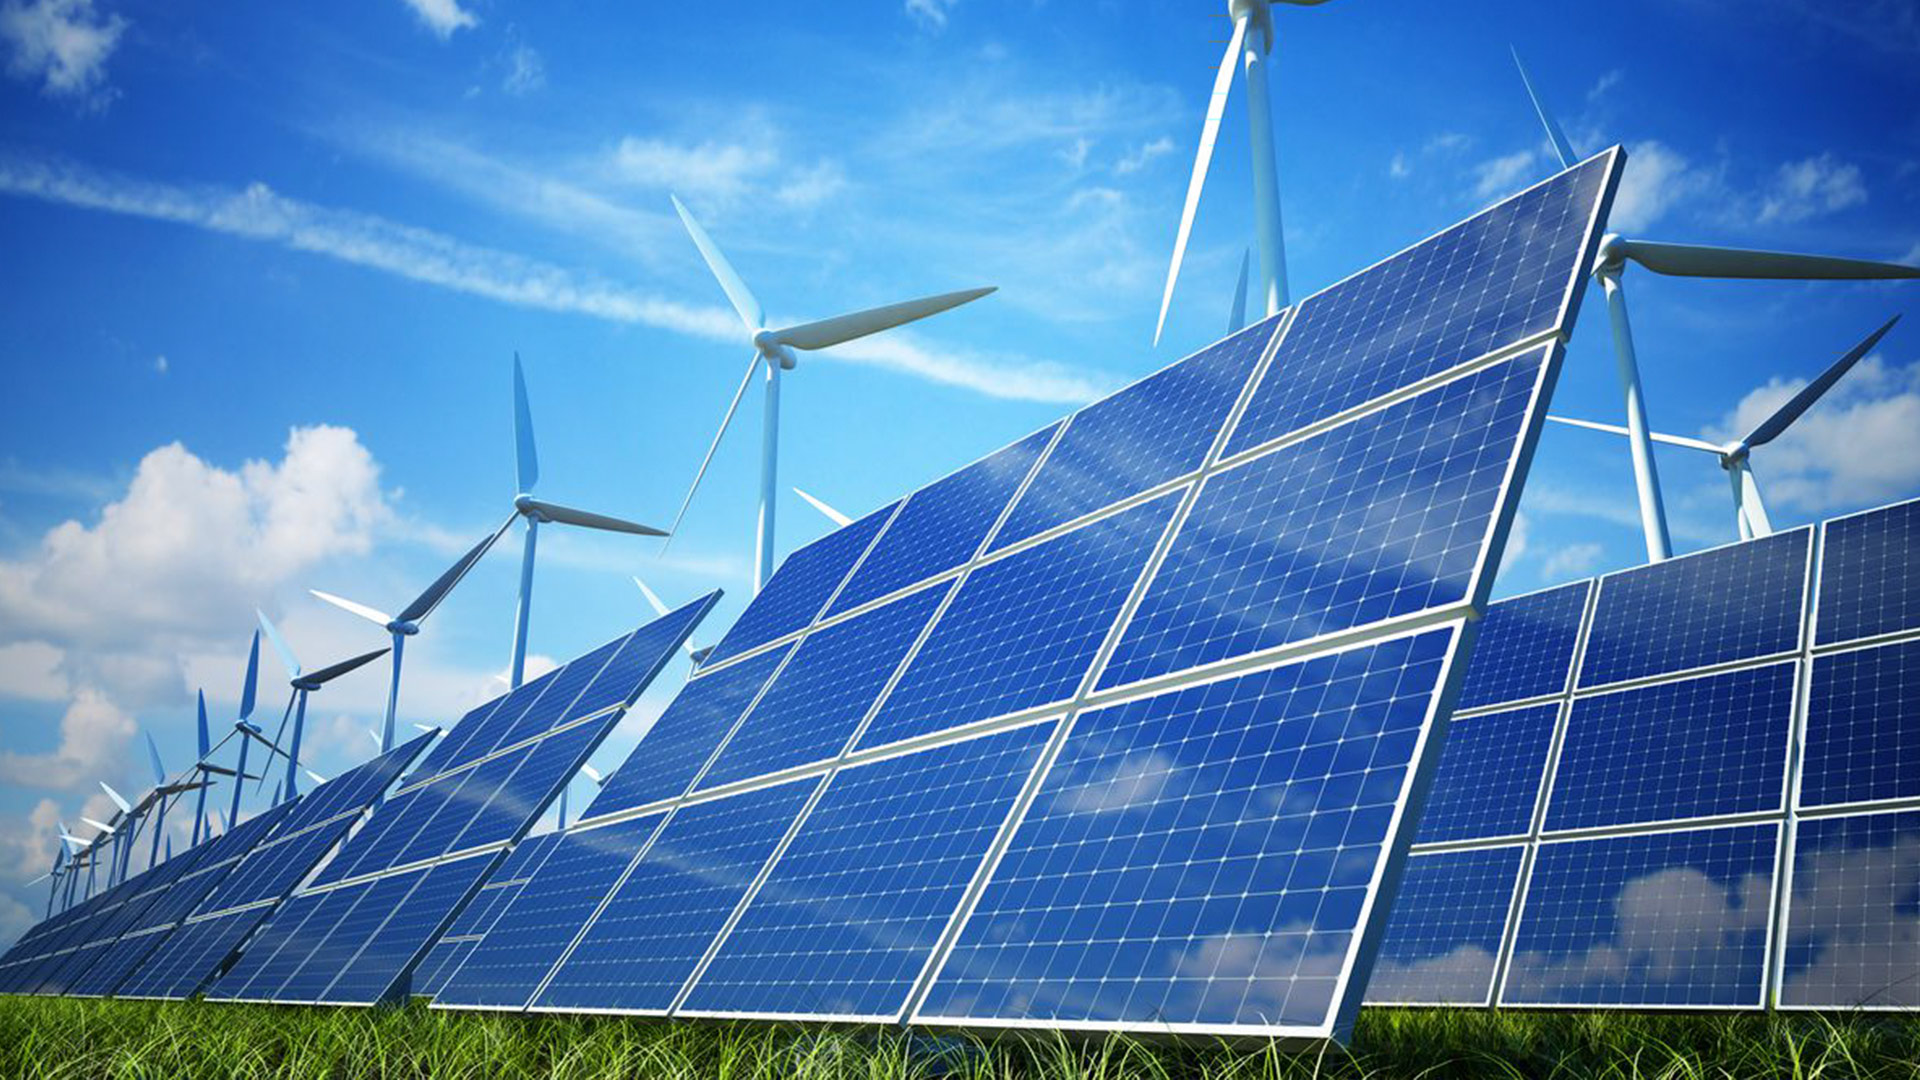 Solar PV and Wind Energy Market 2023 by Top Key Players, Types, Applications and Future Forecast to 2032